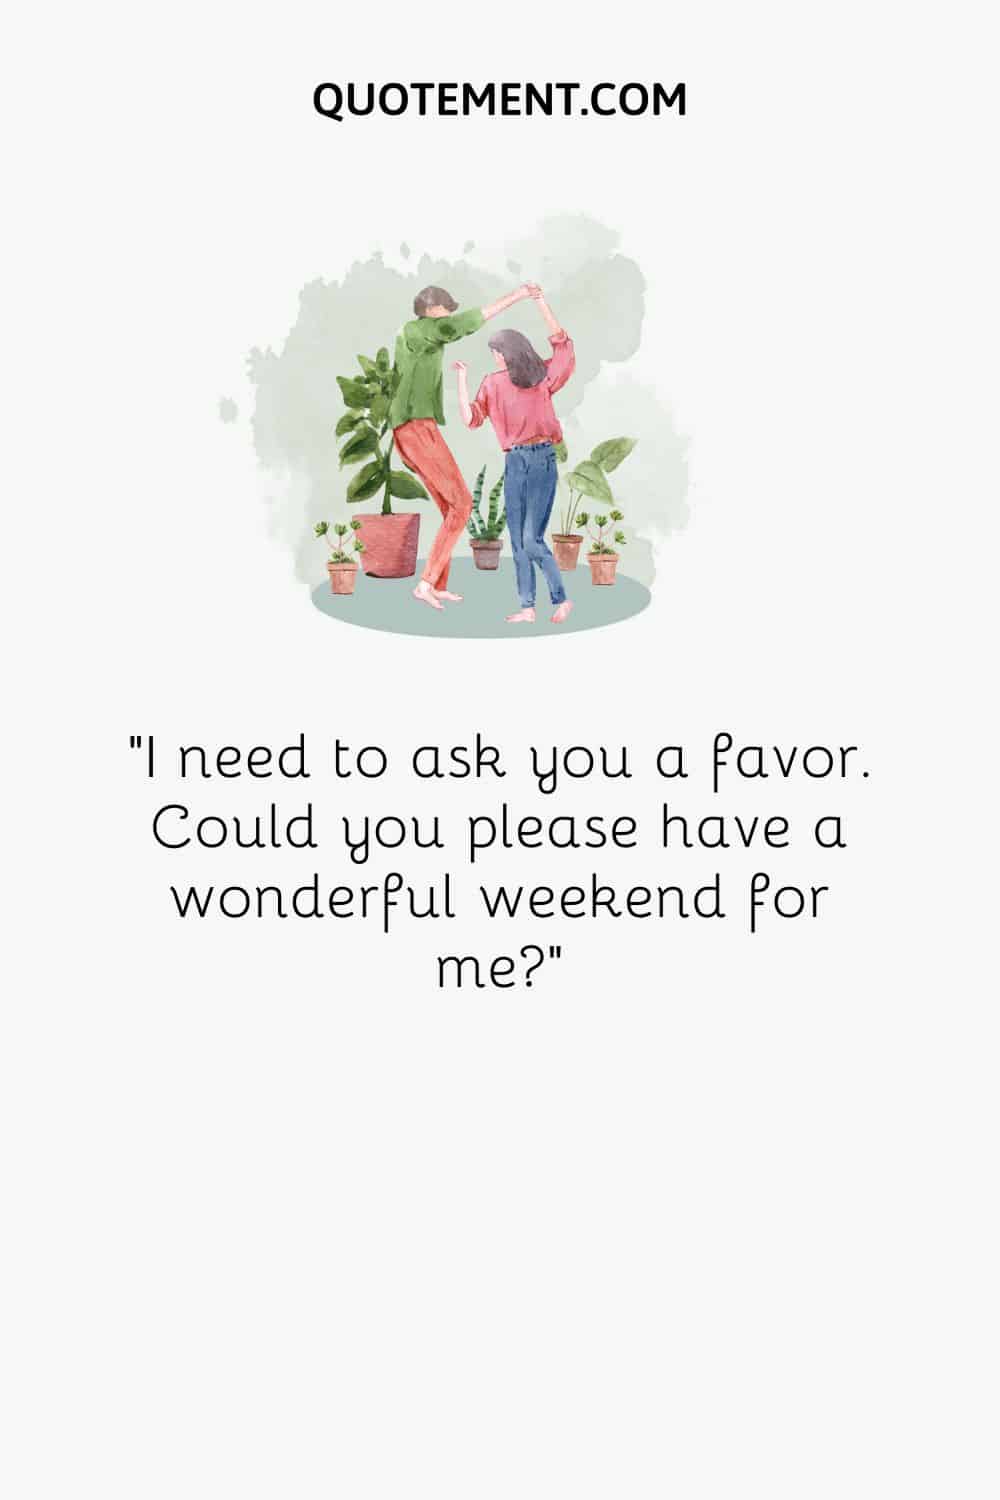 I need to ask you a favor. Could you please have a wonderful weekend for me